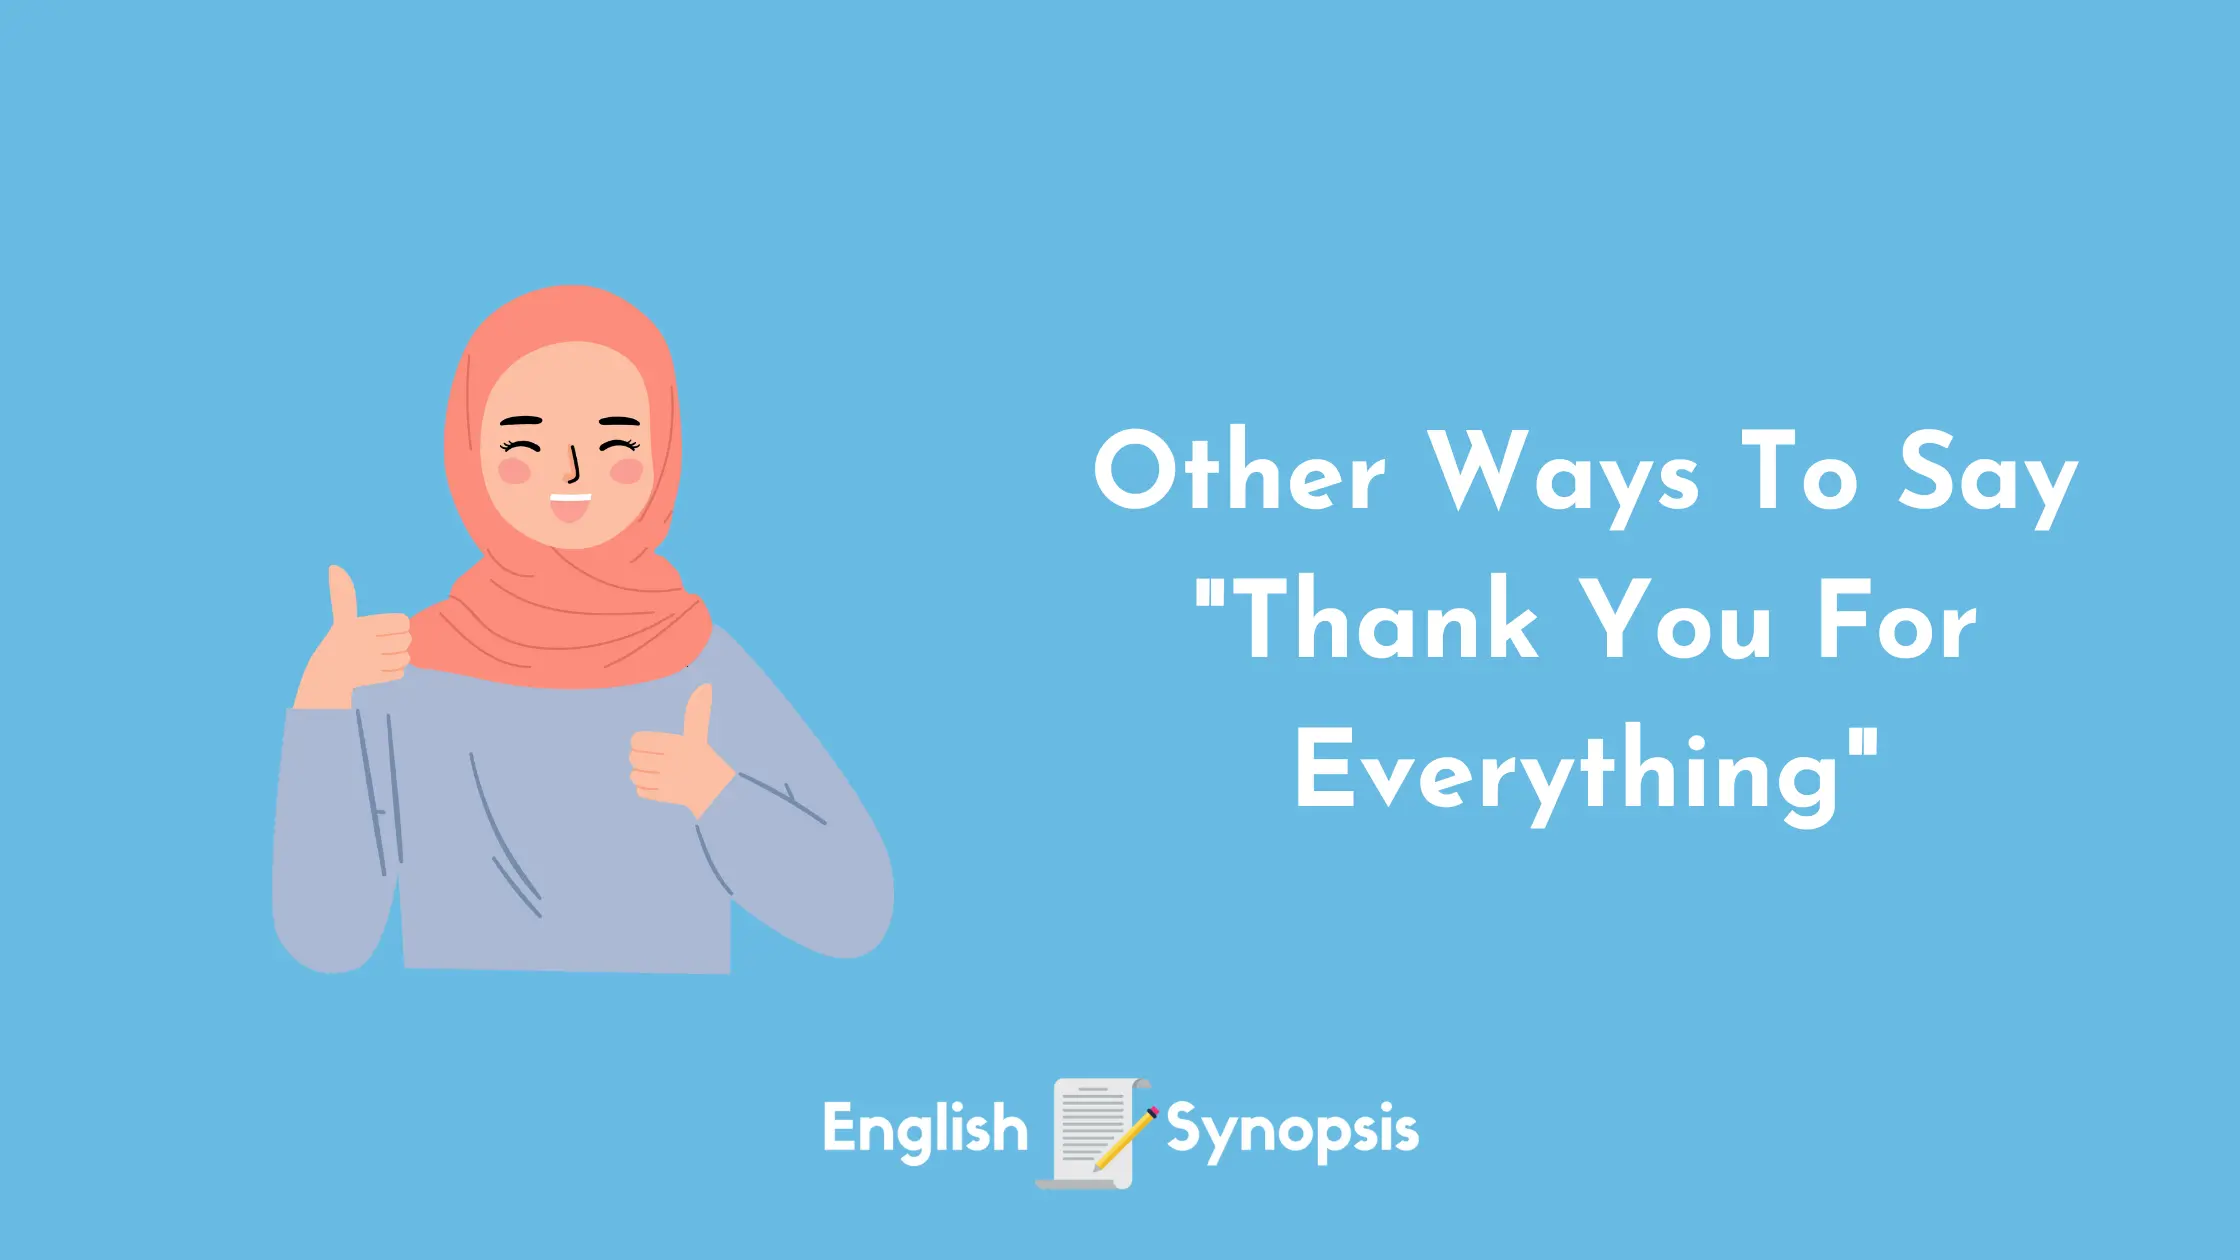 Other Ways To Say "Thank You For Everything"